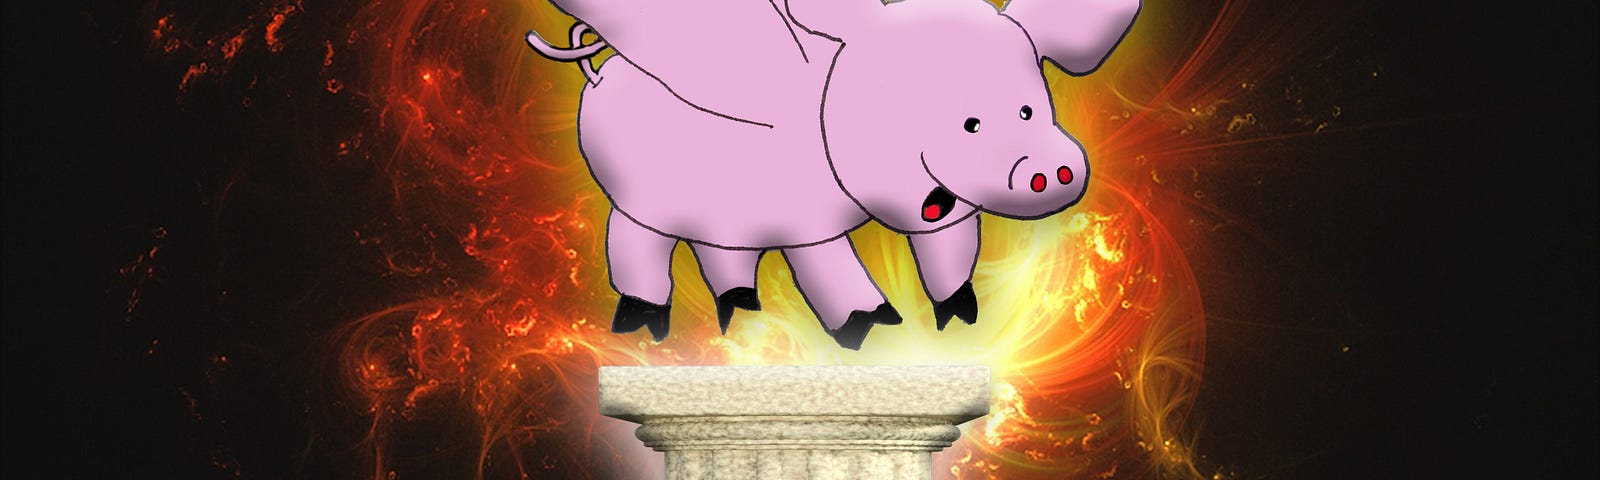 A flying pink pig alights on a pedestal with a background of fire